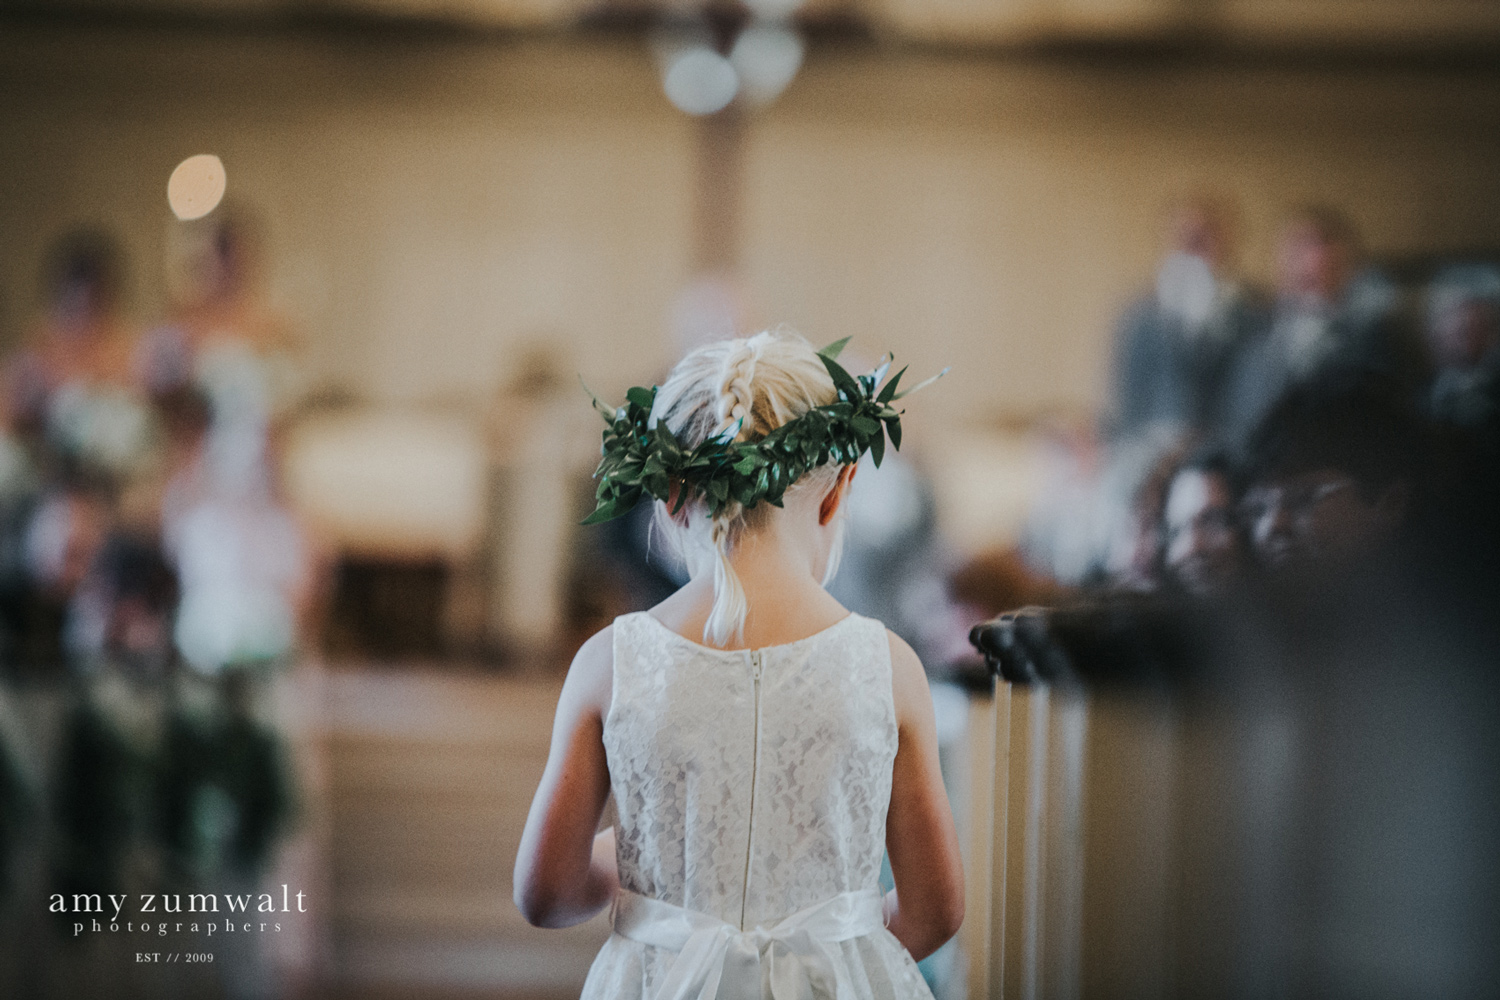 Flower girl with greenery floral crown walking down the aisle